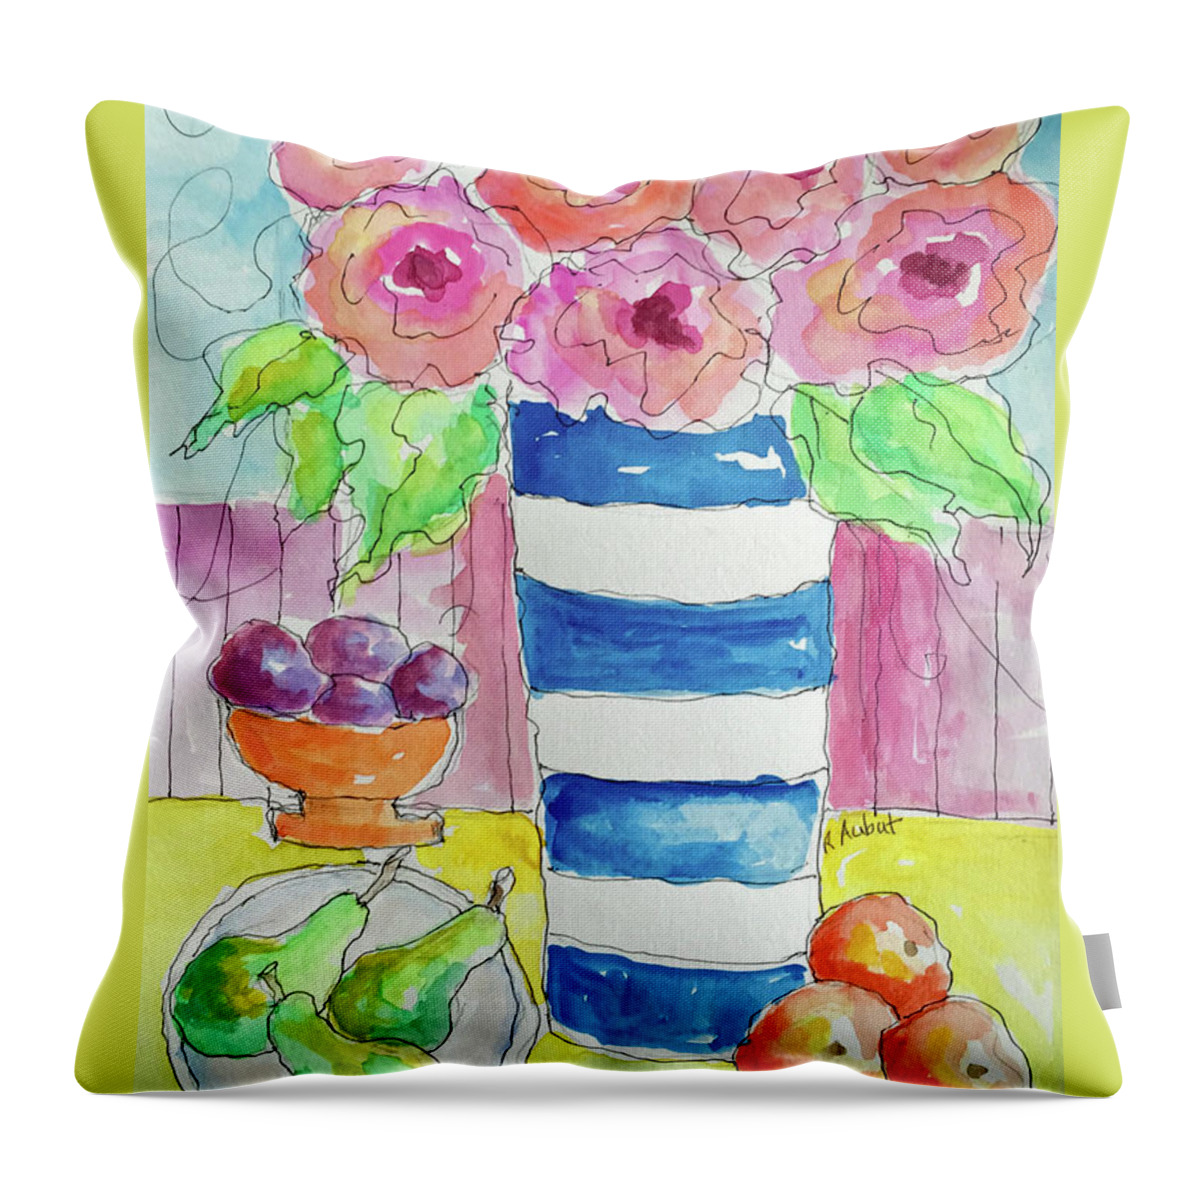 Fruit Throw Pillow featuring the painting Fruit Salad by Rosemary Aubut